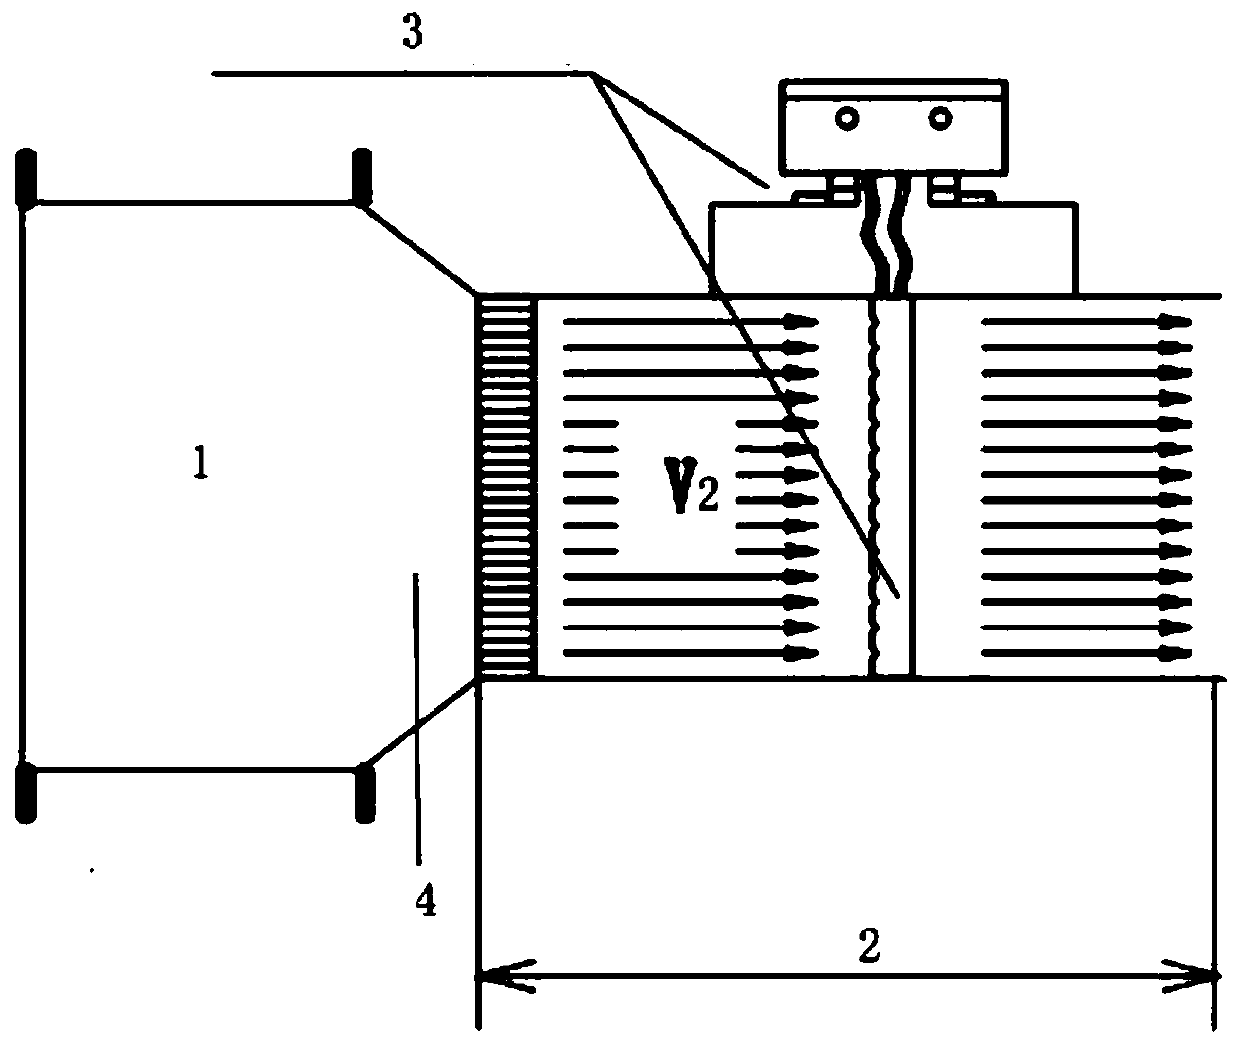 Device for measuring air volume under multiple work conditions